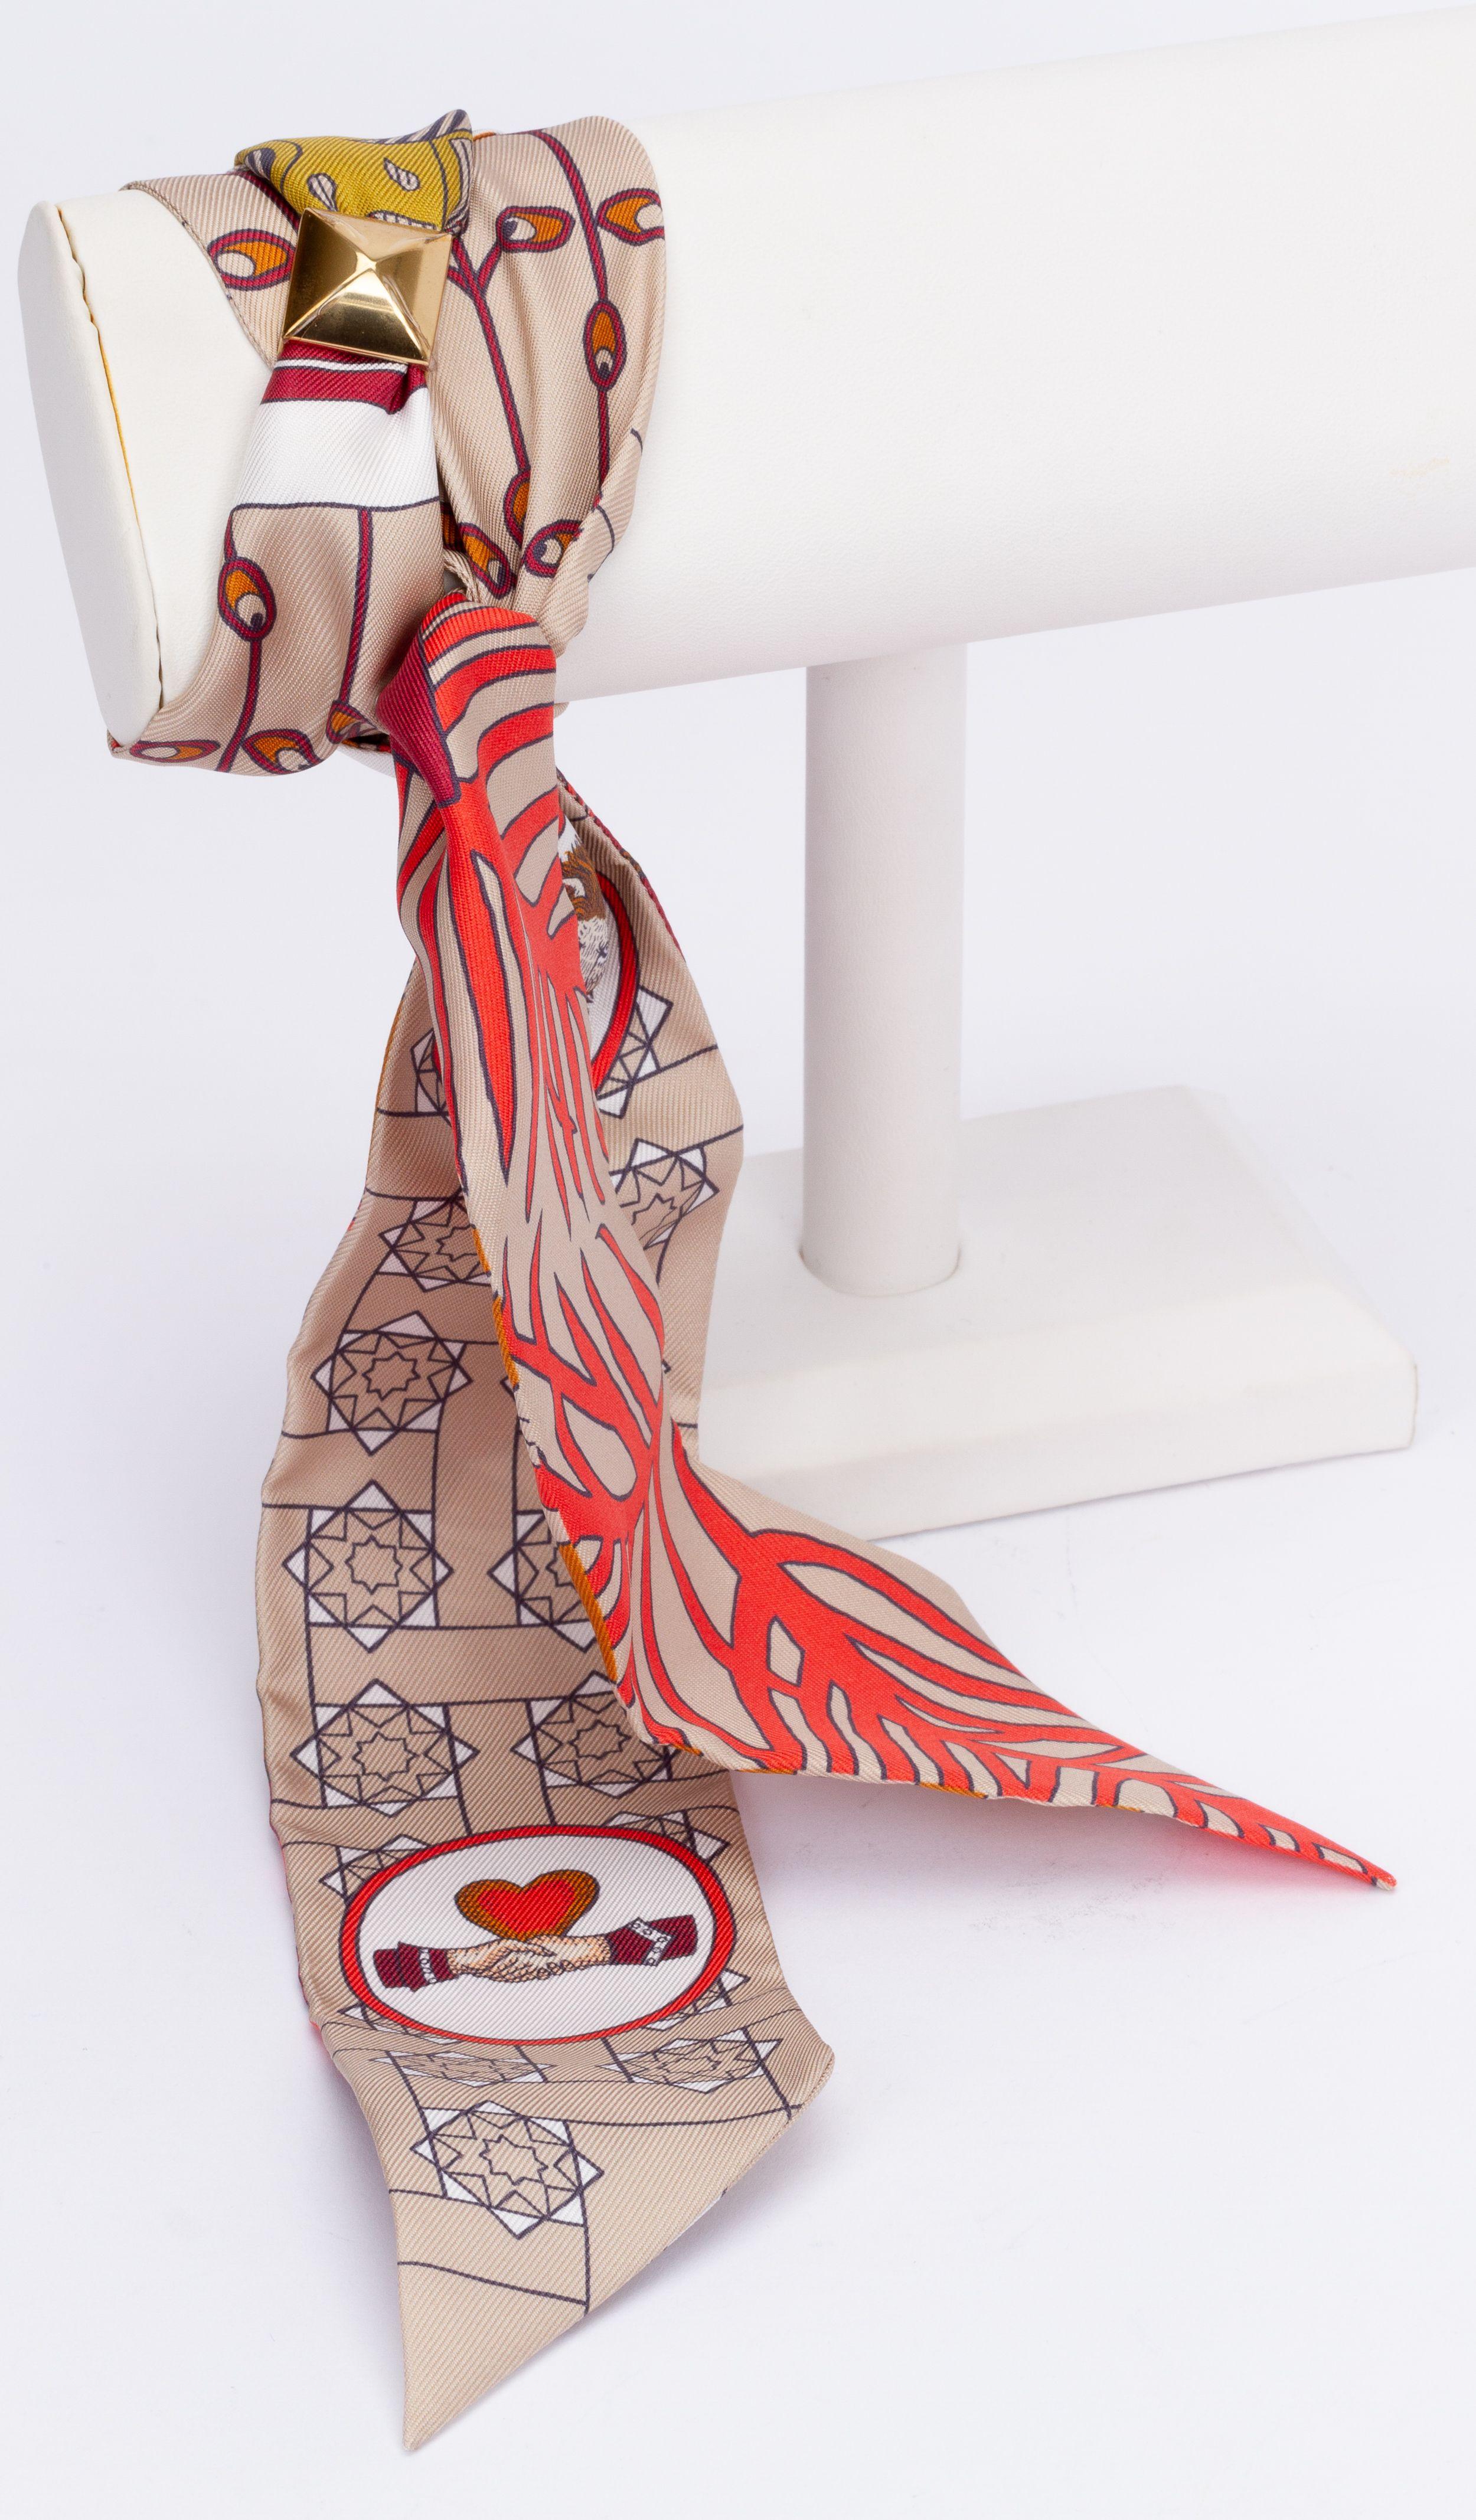 New Hermès La Danse Des Amazones Twilly. The scarf is made out of silk and the main color is beige and coral. The print shows animals like an owl. The piece comes with a scarf ring, original box and ribbon.